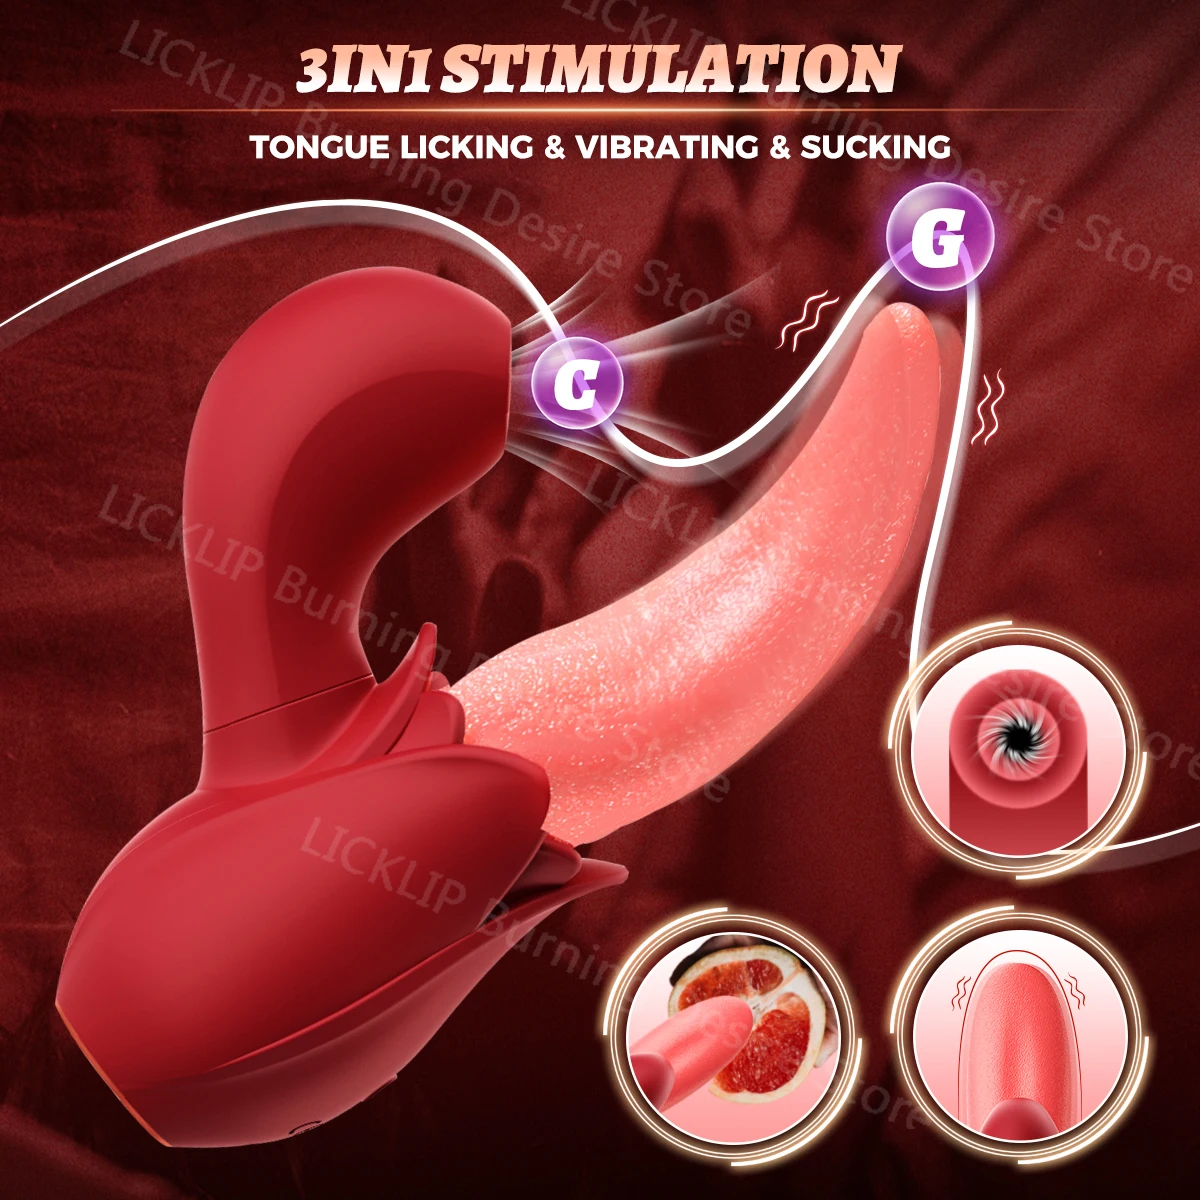 2 in 1 Sucking Rose Vibrator For Women Double Stimulation Clitoris Stimulator Tapping Licking Vagina G Spot Masturbator Sex Toys Trending Now cb5feb1b7314637725a2e7: Red 2 with box